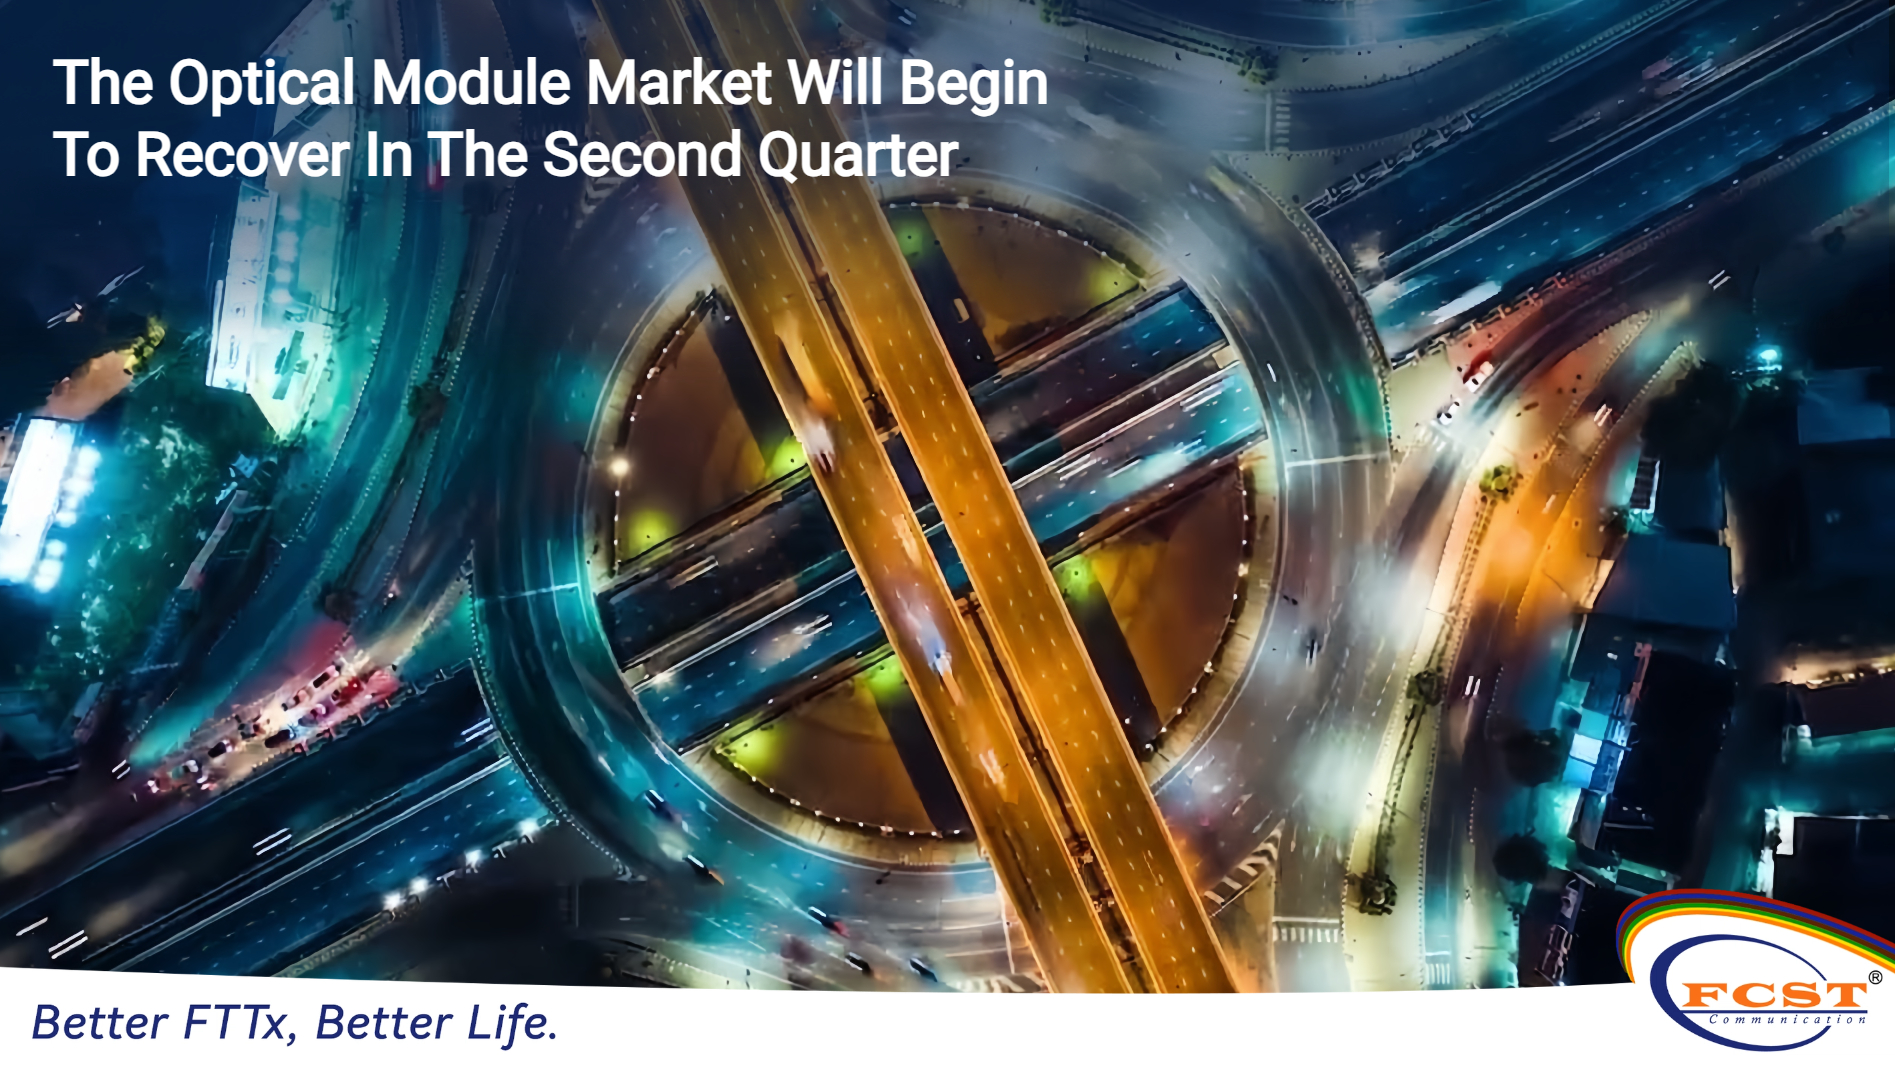 The Optical Module Market Will Begin To Recover In The Second Quarter